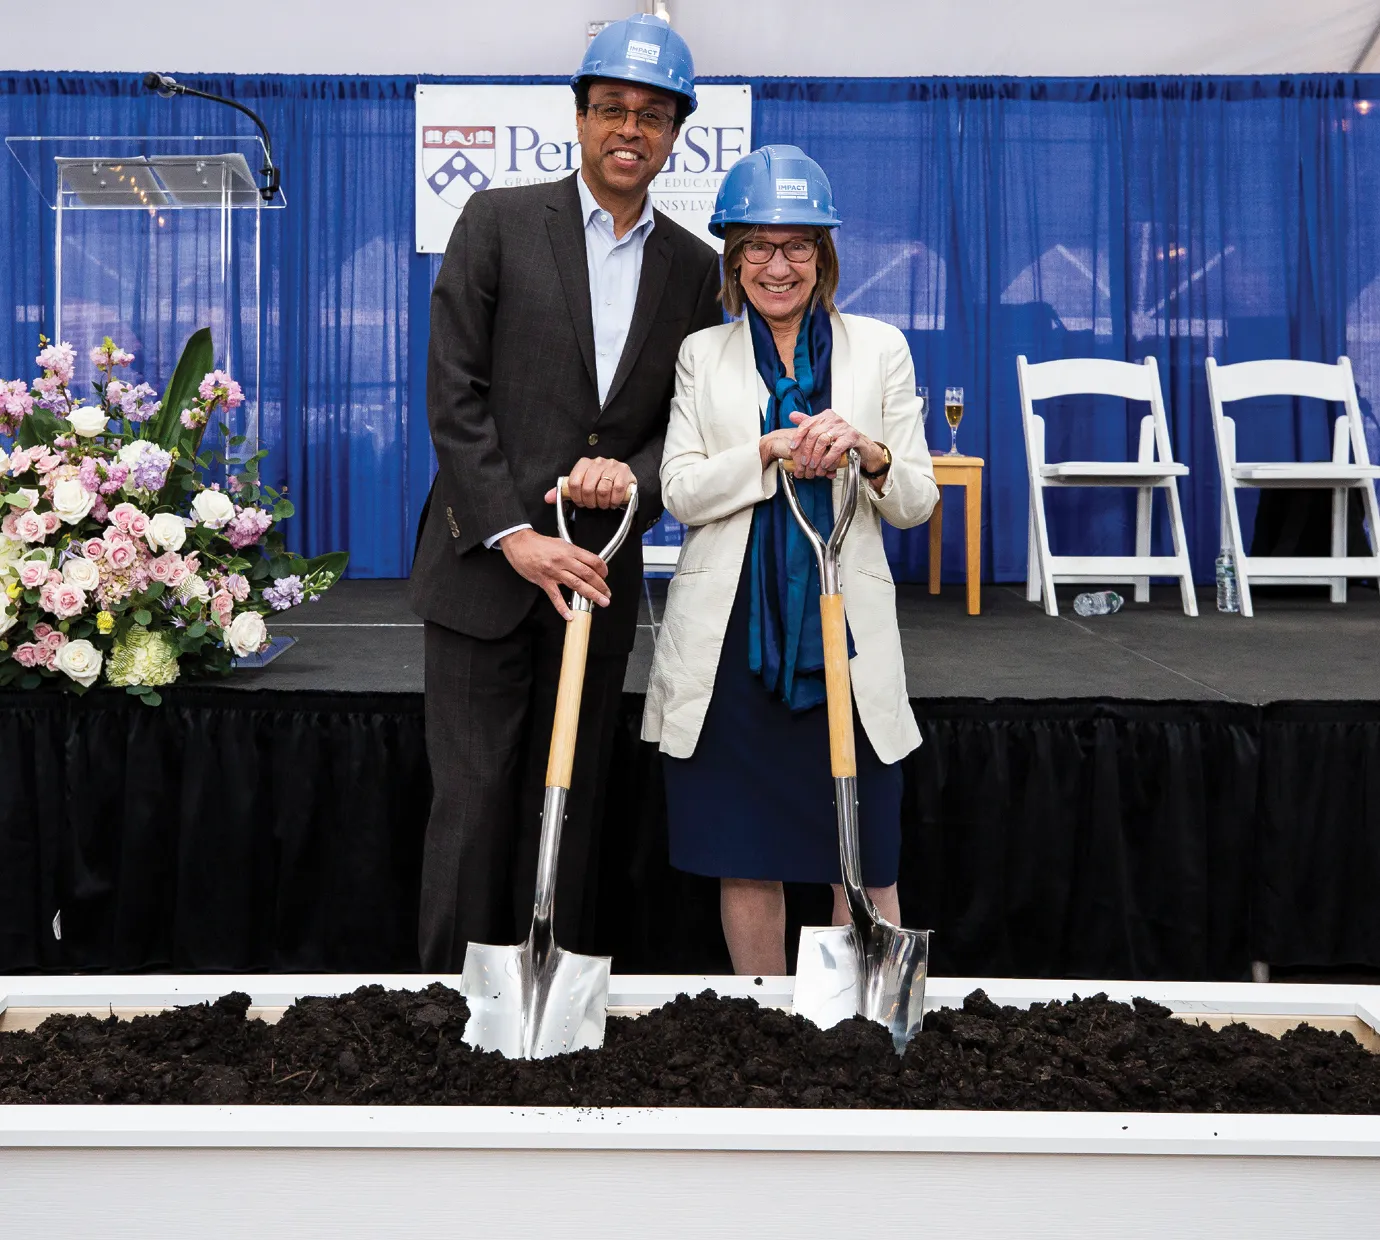 Former Provost Wendell Pritchett and Dean Pam Grossman at the groundbreaking.